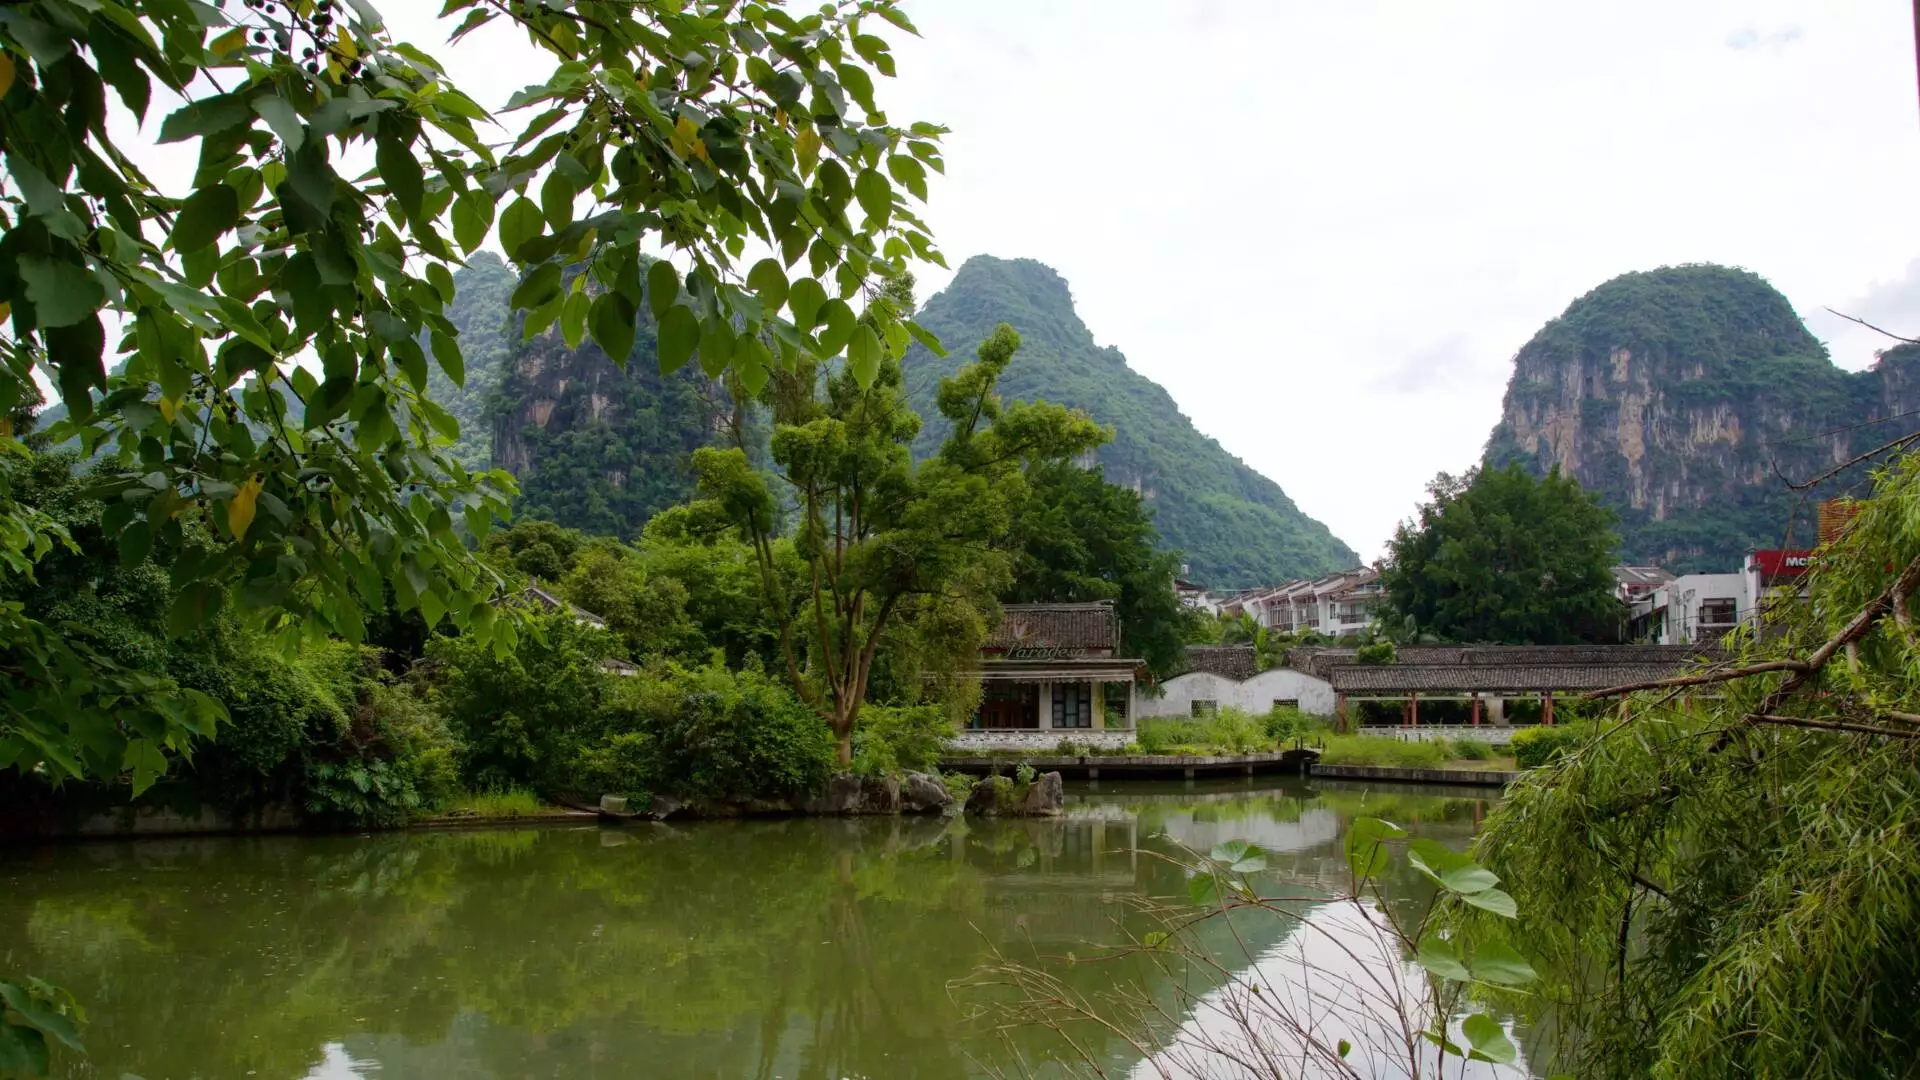 Yangshuo On Guilin In China